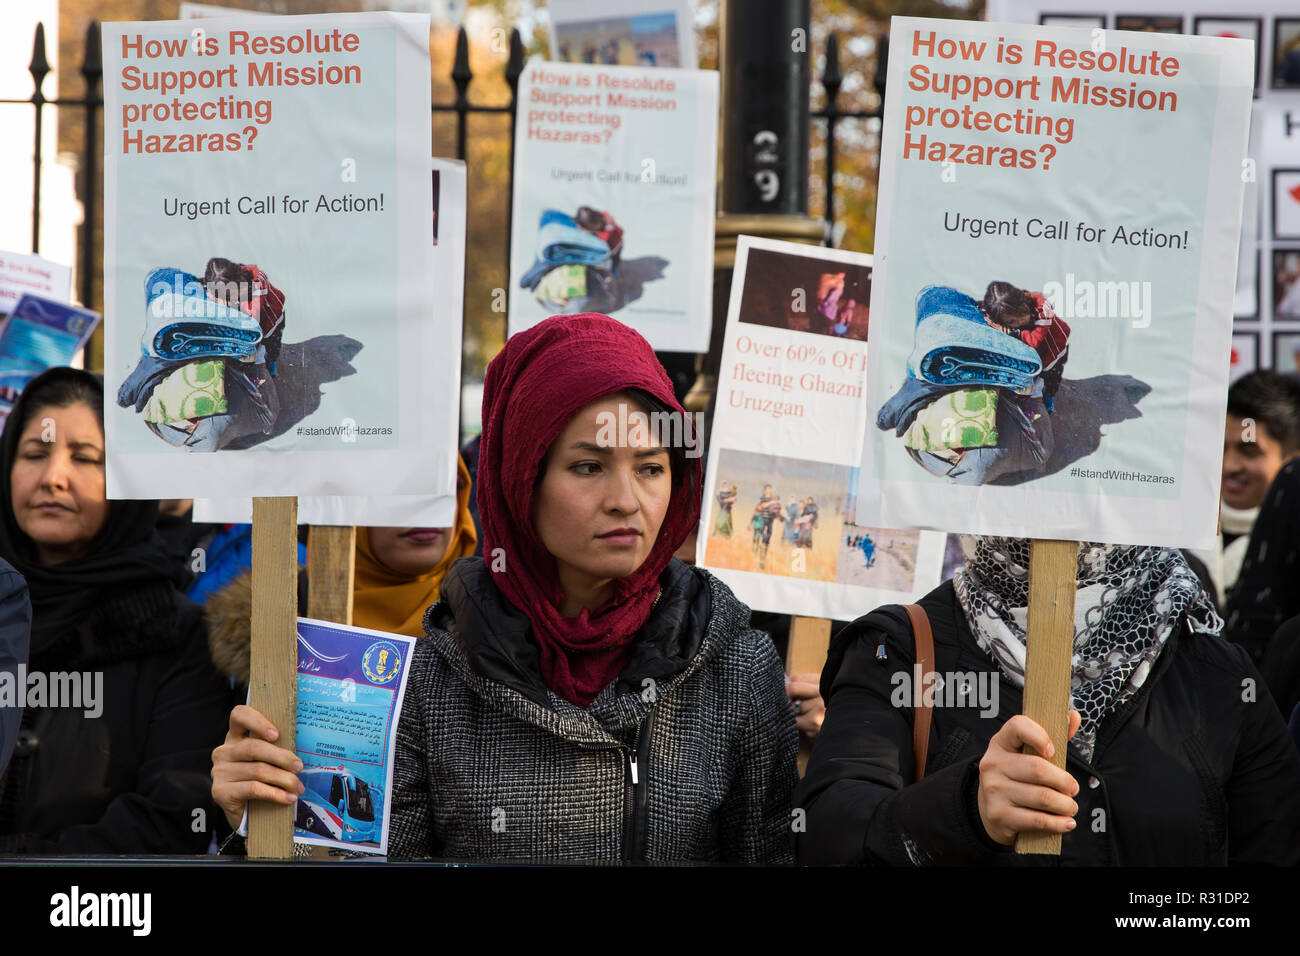 London, UK. 21st November, 2018. Members of the Hazara community, an ethnic group native to the region of Hazarajat in central Afghanistan, protest opposite Downing Street against a lack of assistance from the Afghan government in the face of attacks by the Taliban and Islamic State. Credit: Mark Kerrison/Alamy Live News Stock Photo